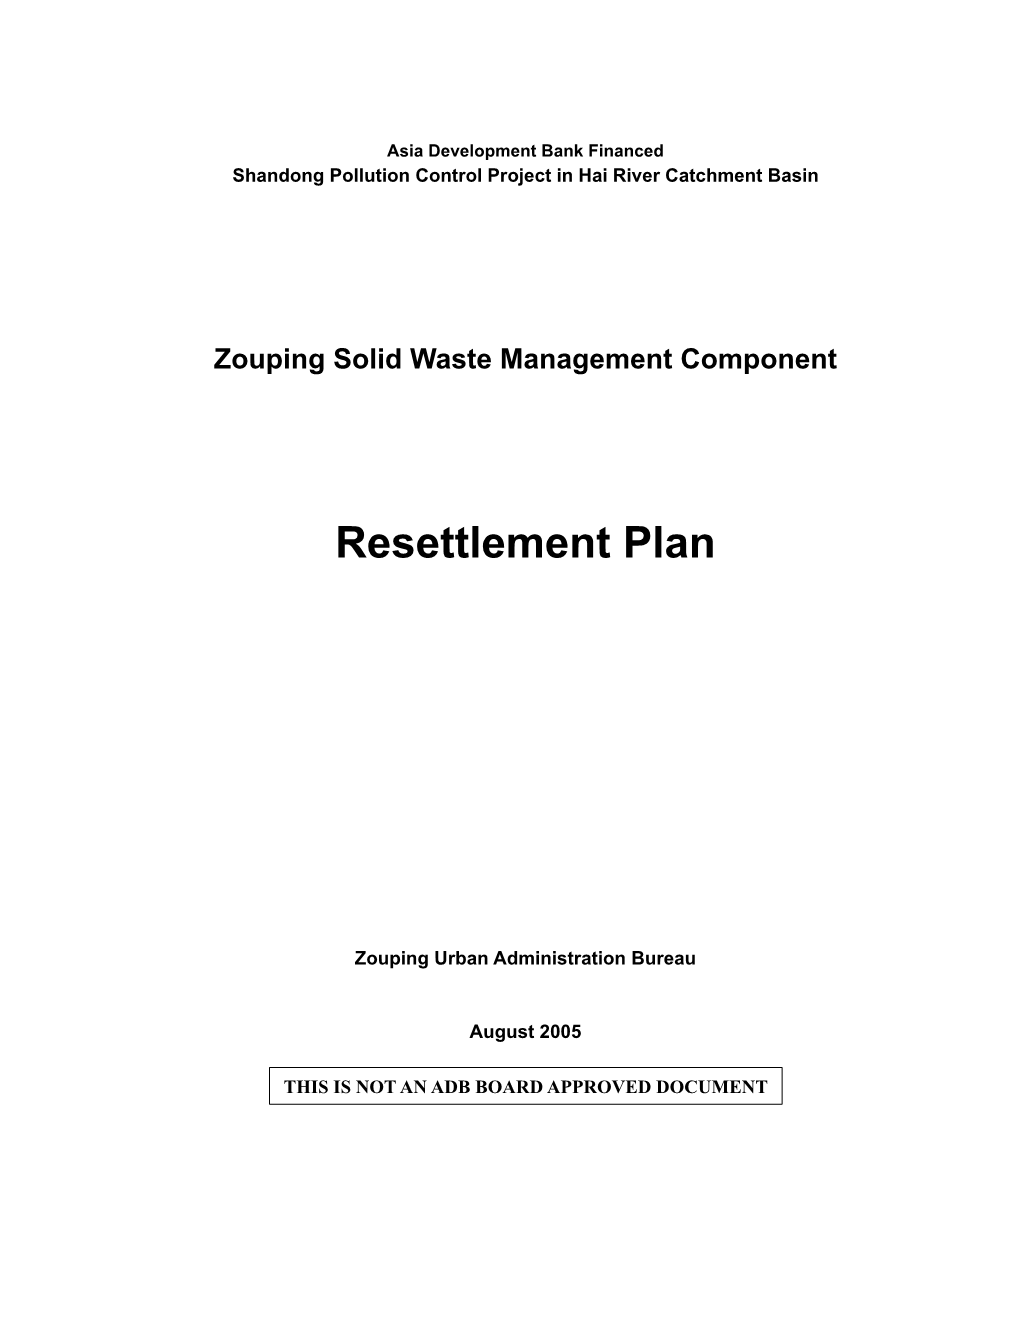 Zouping Solid Waste Management Component